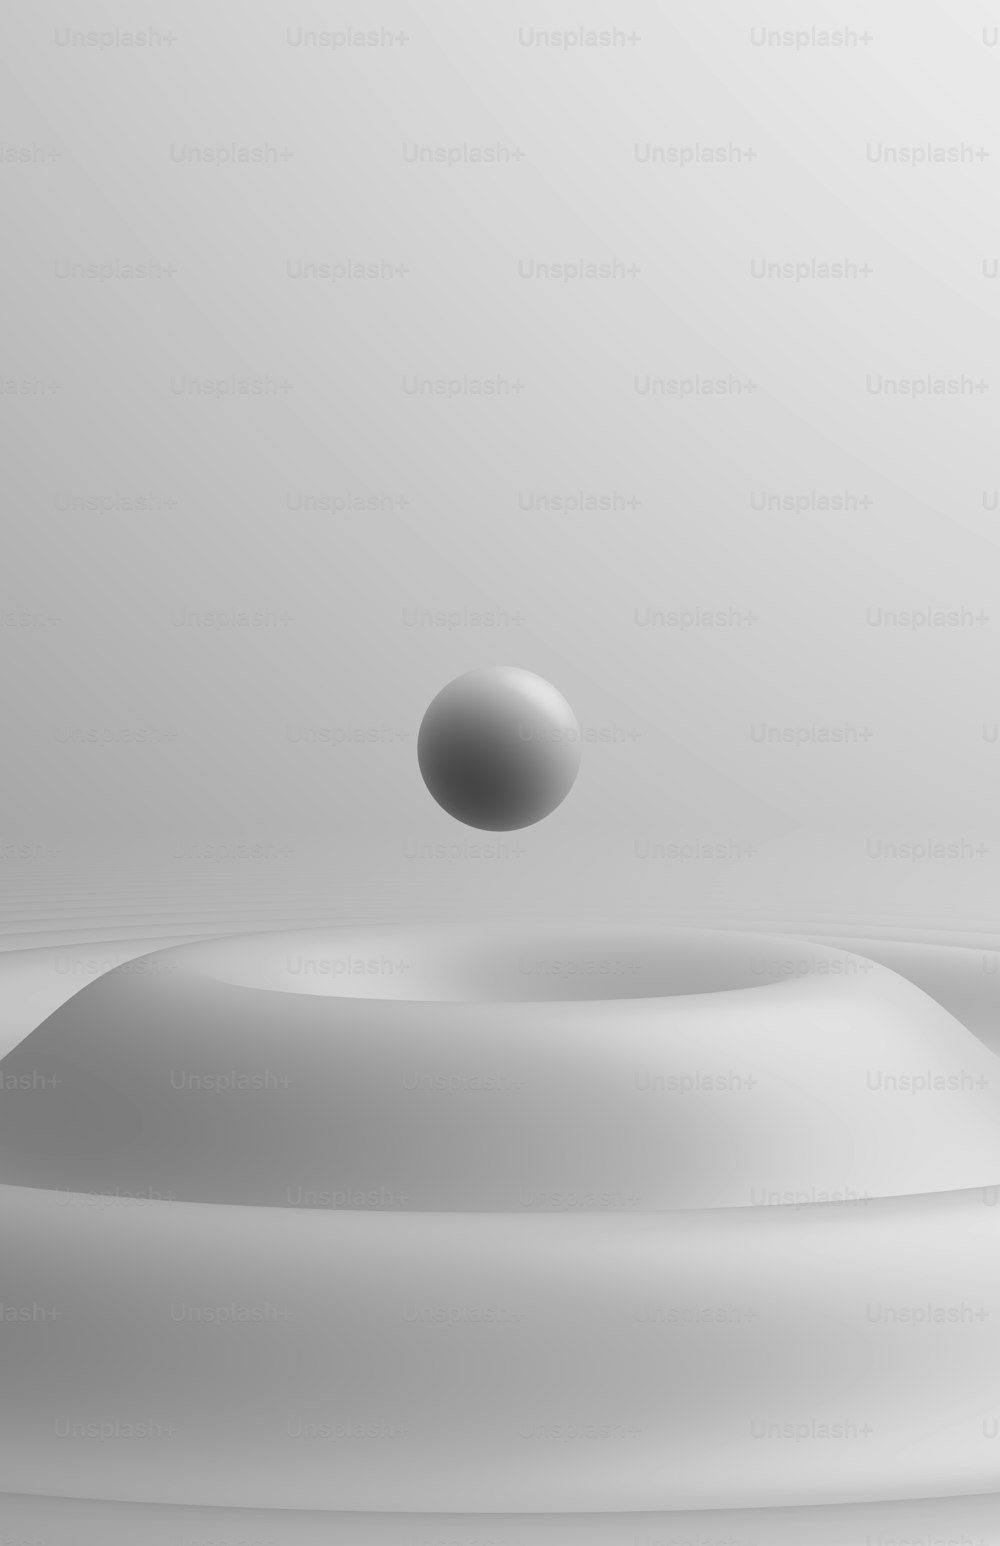 a white object floating on top of a white surface